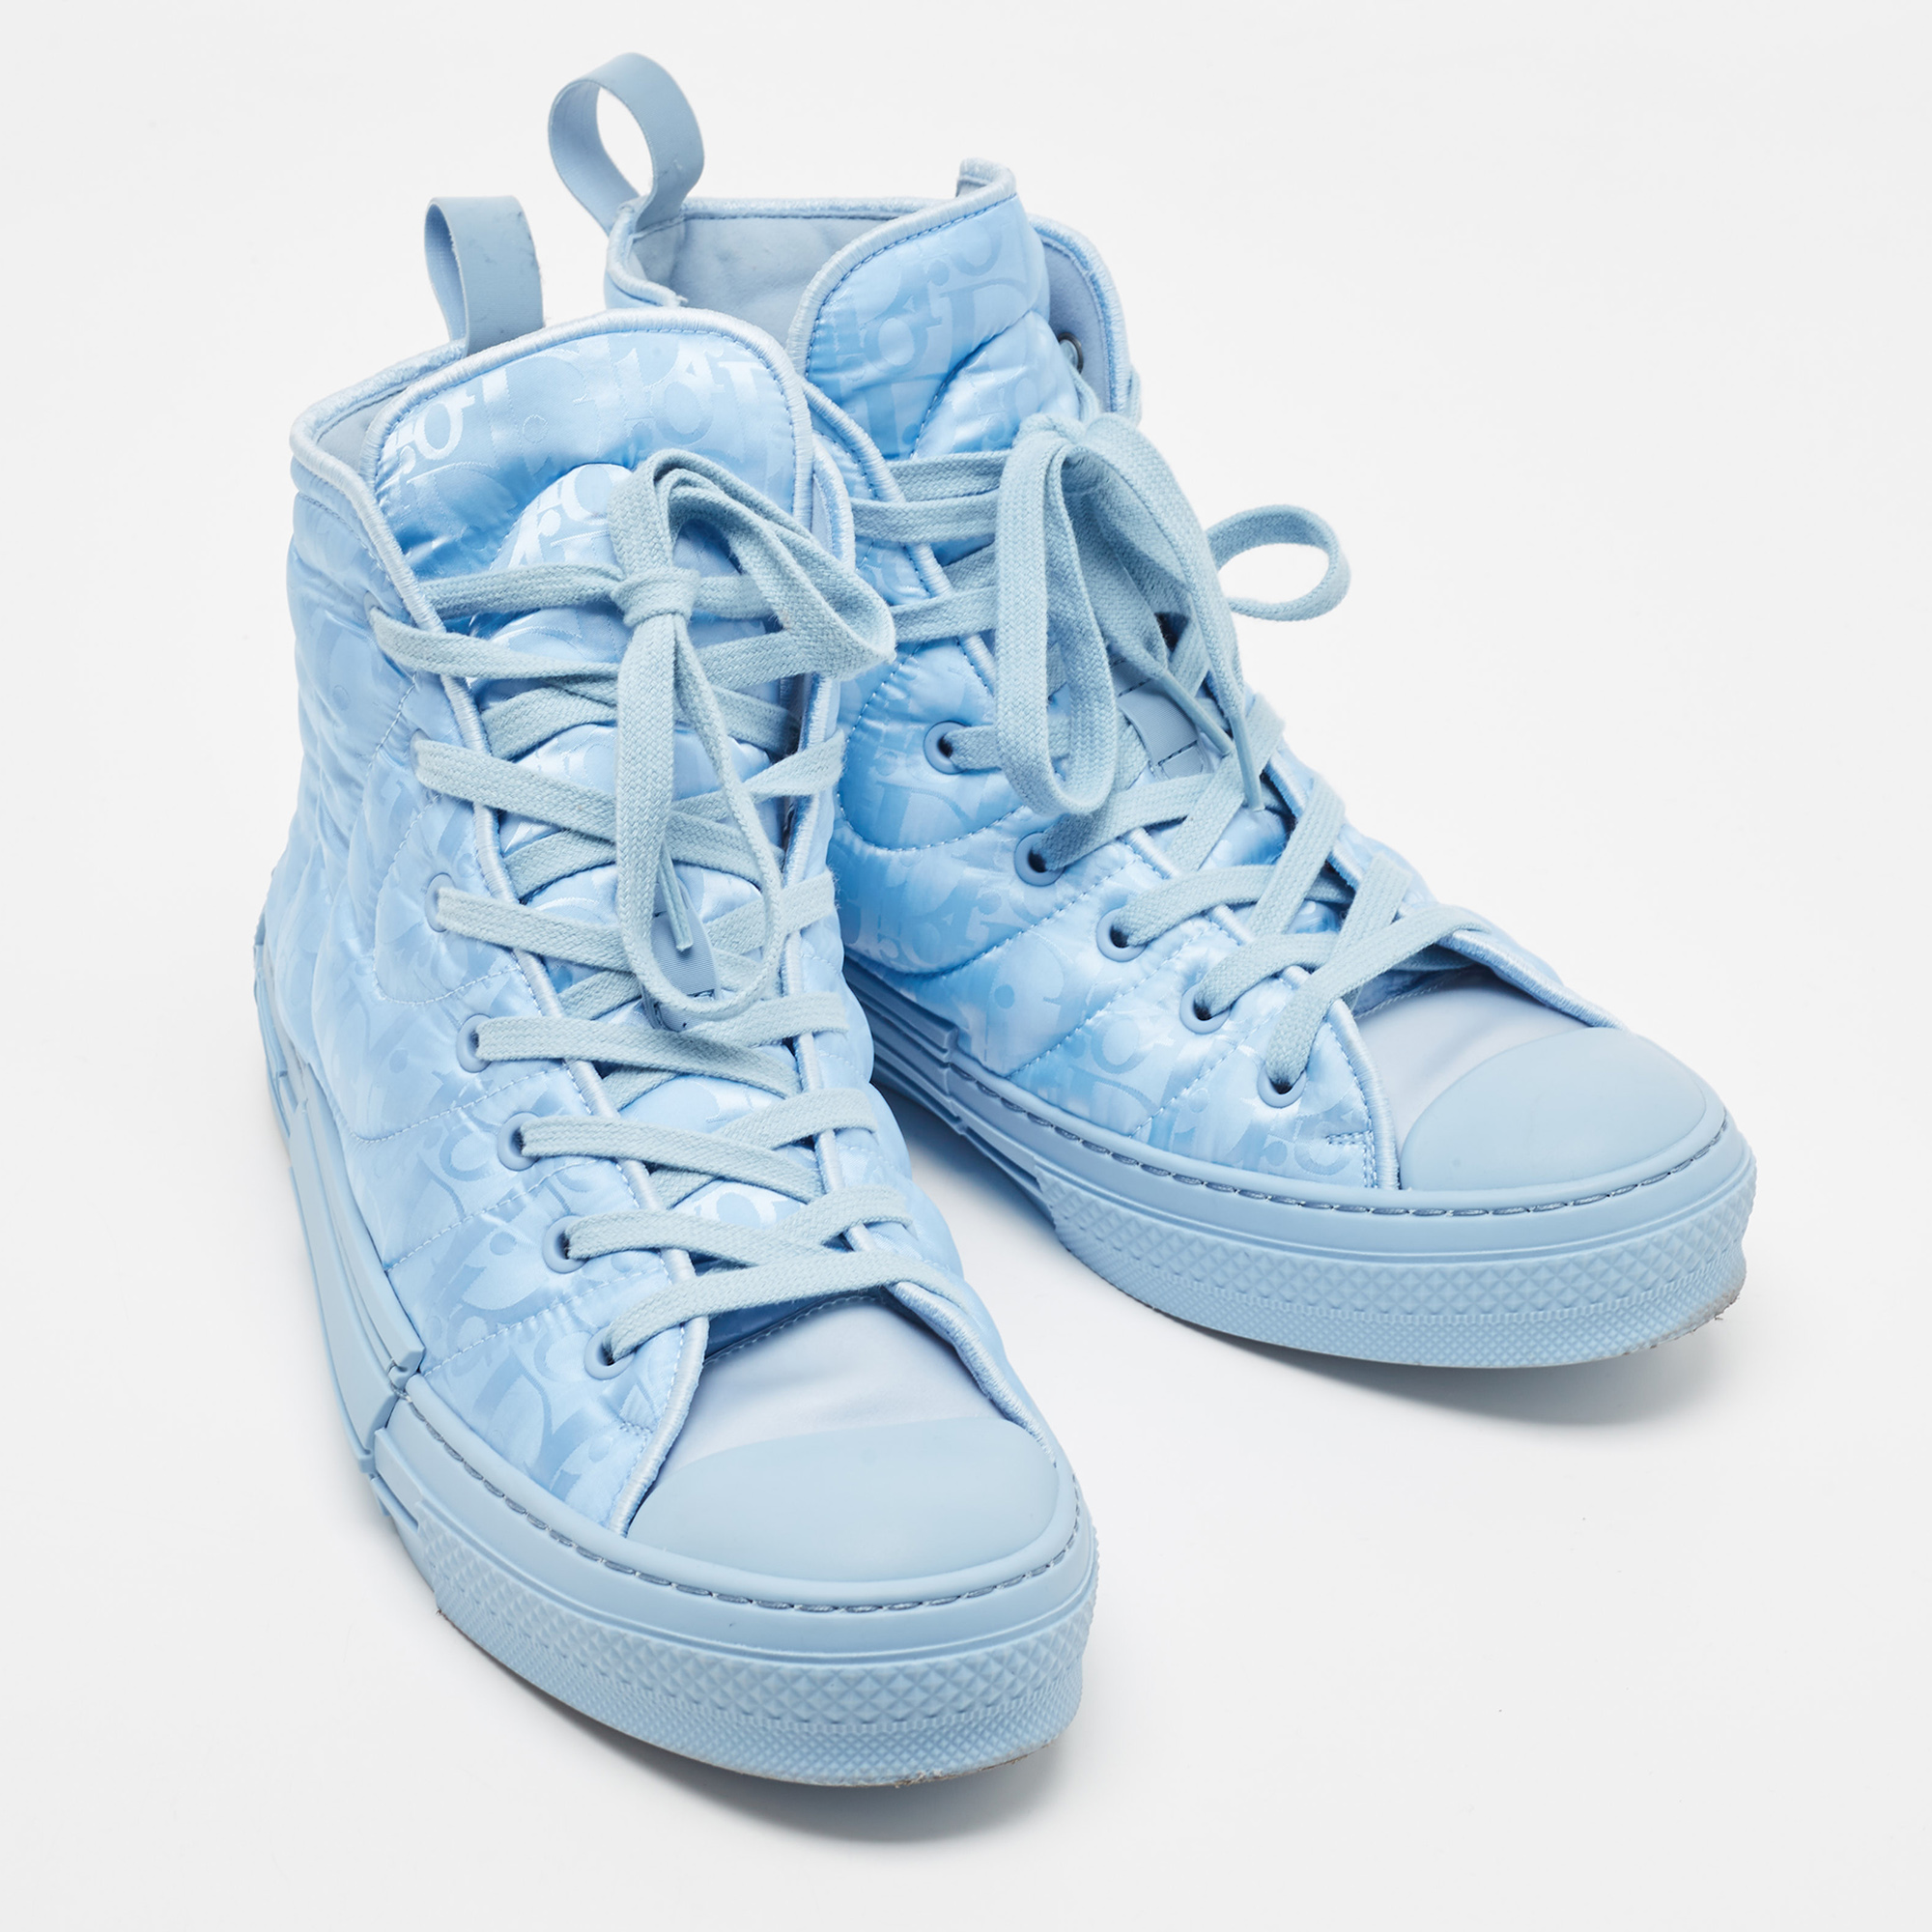 Dior Blue Oblique Quilted Fabric B23 High Top Sneakers Size 42.5